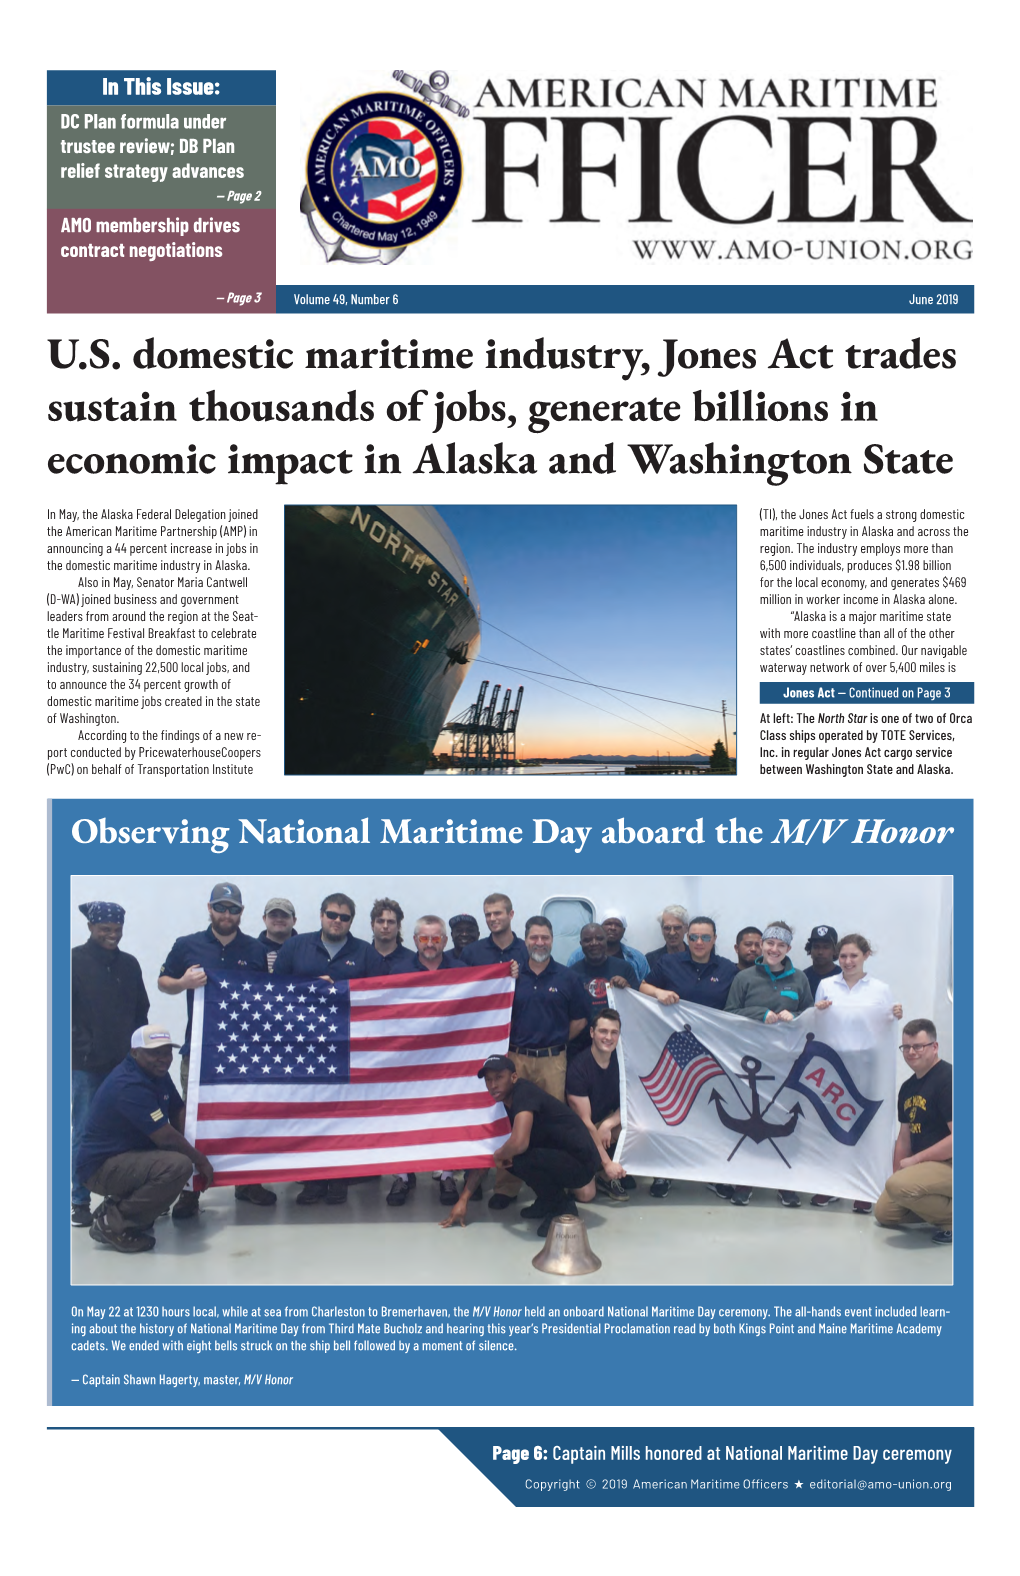 U.S. Domestic Maritime Industry, Jones Act Trades Sustain Thousands of Jobs, Generate Billions in Economic Impact in Alaska and Washington State